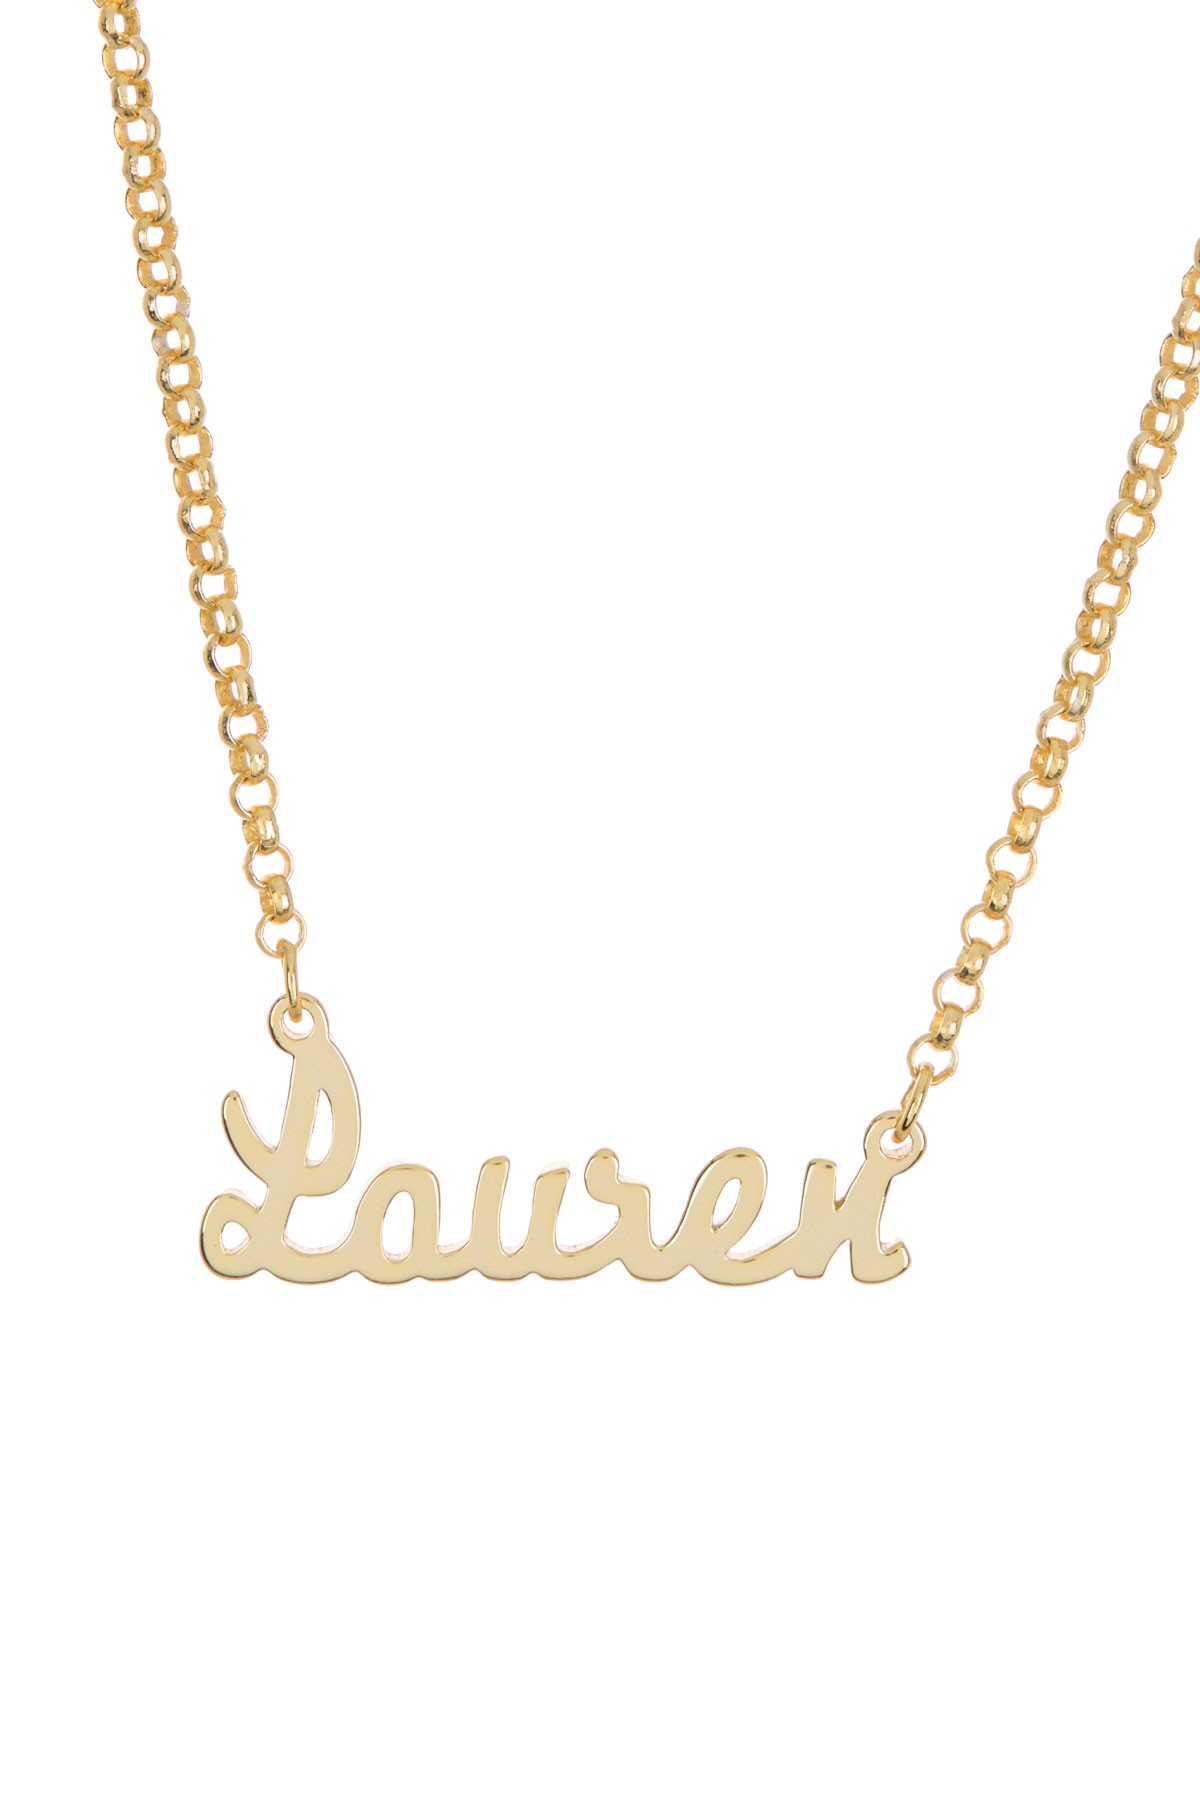 18K Yellow Gold Plated Sterling Silver 'Lauren' Name Pendant Necklace Argento Vivo